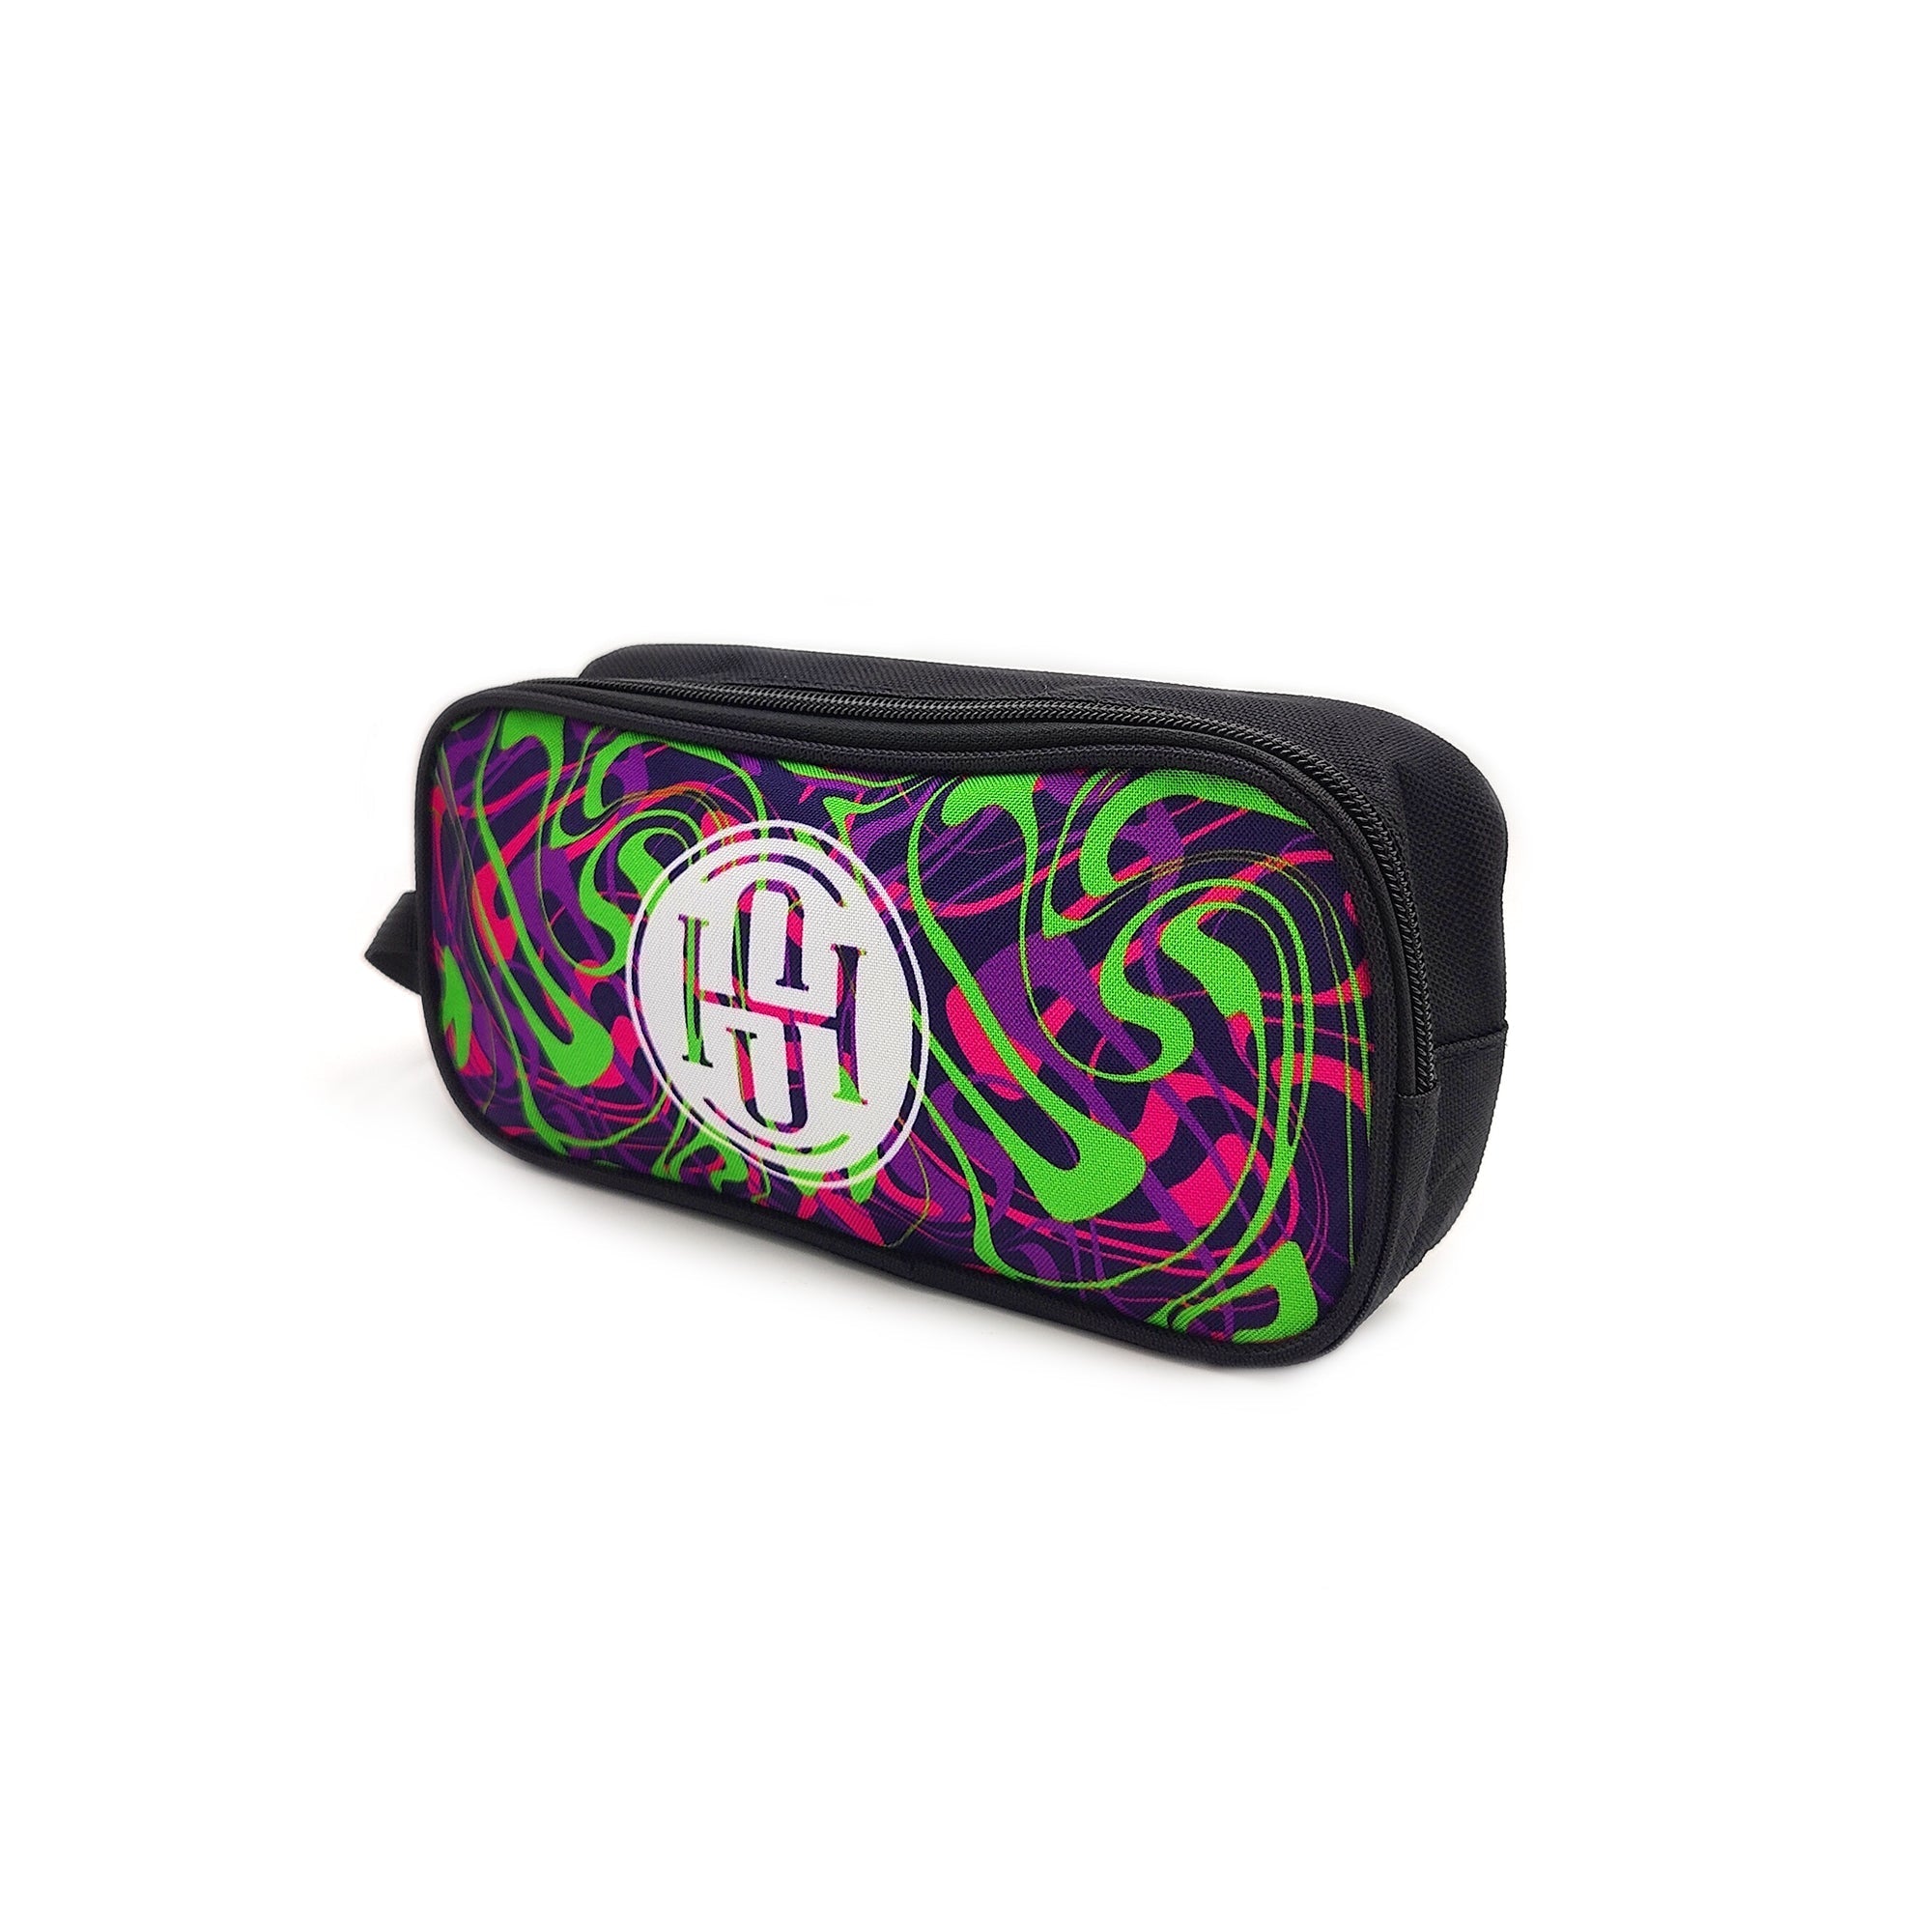 High Society | Limited Edition Stash Case